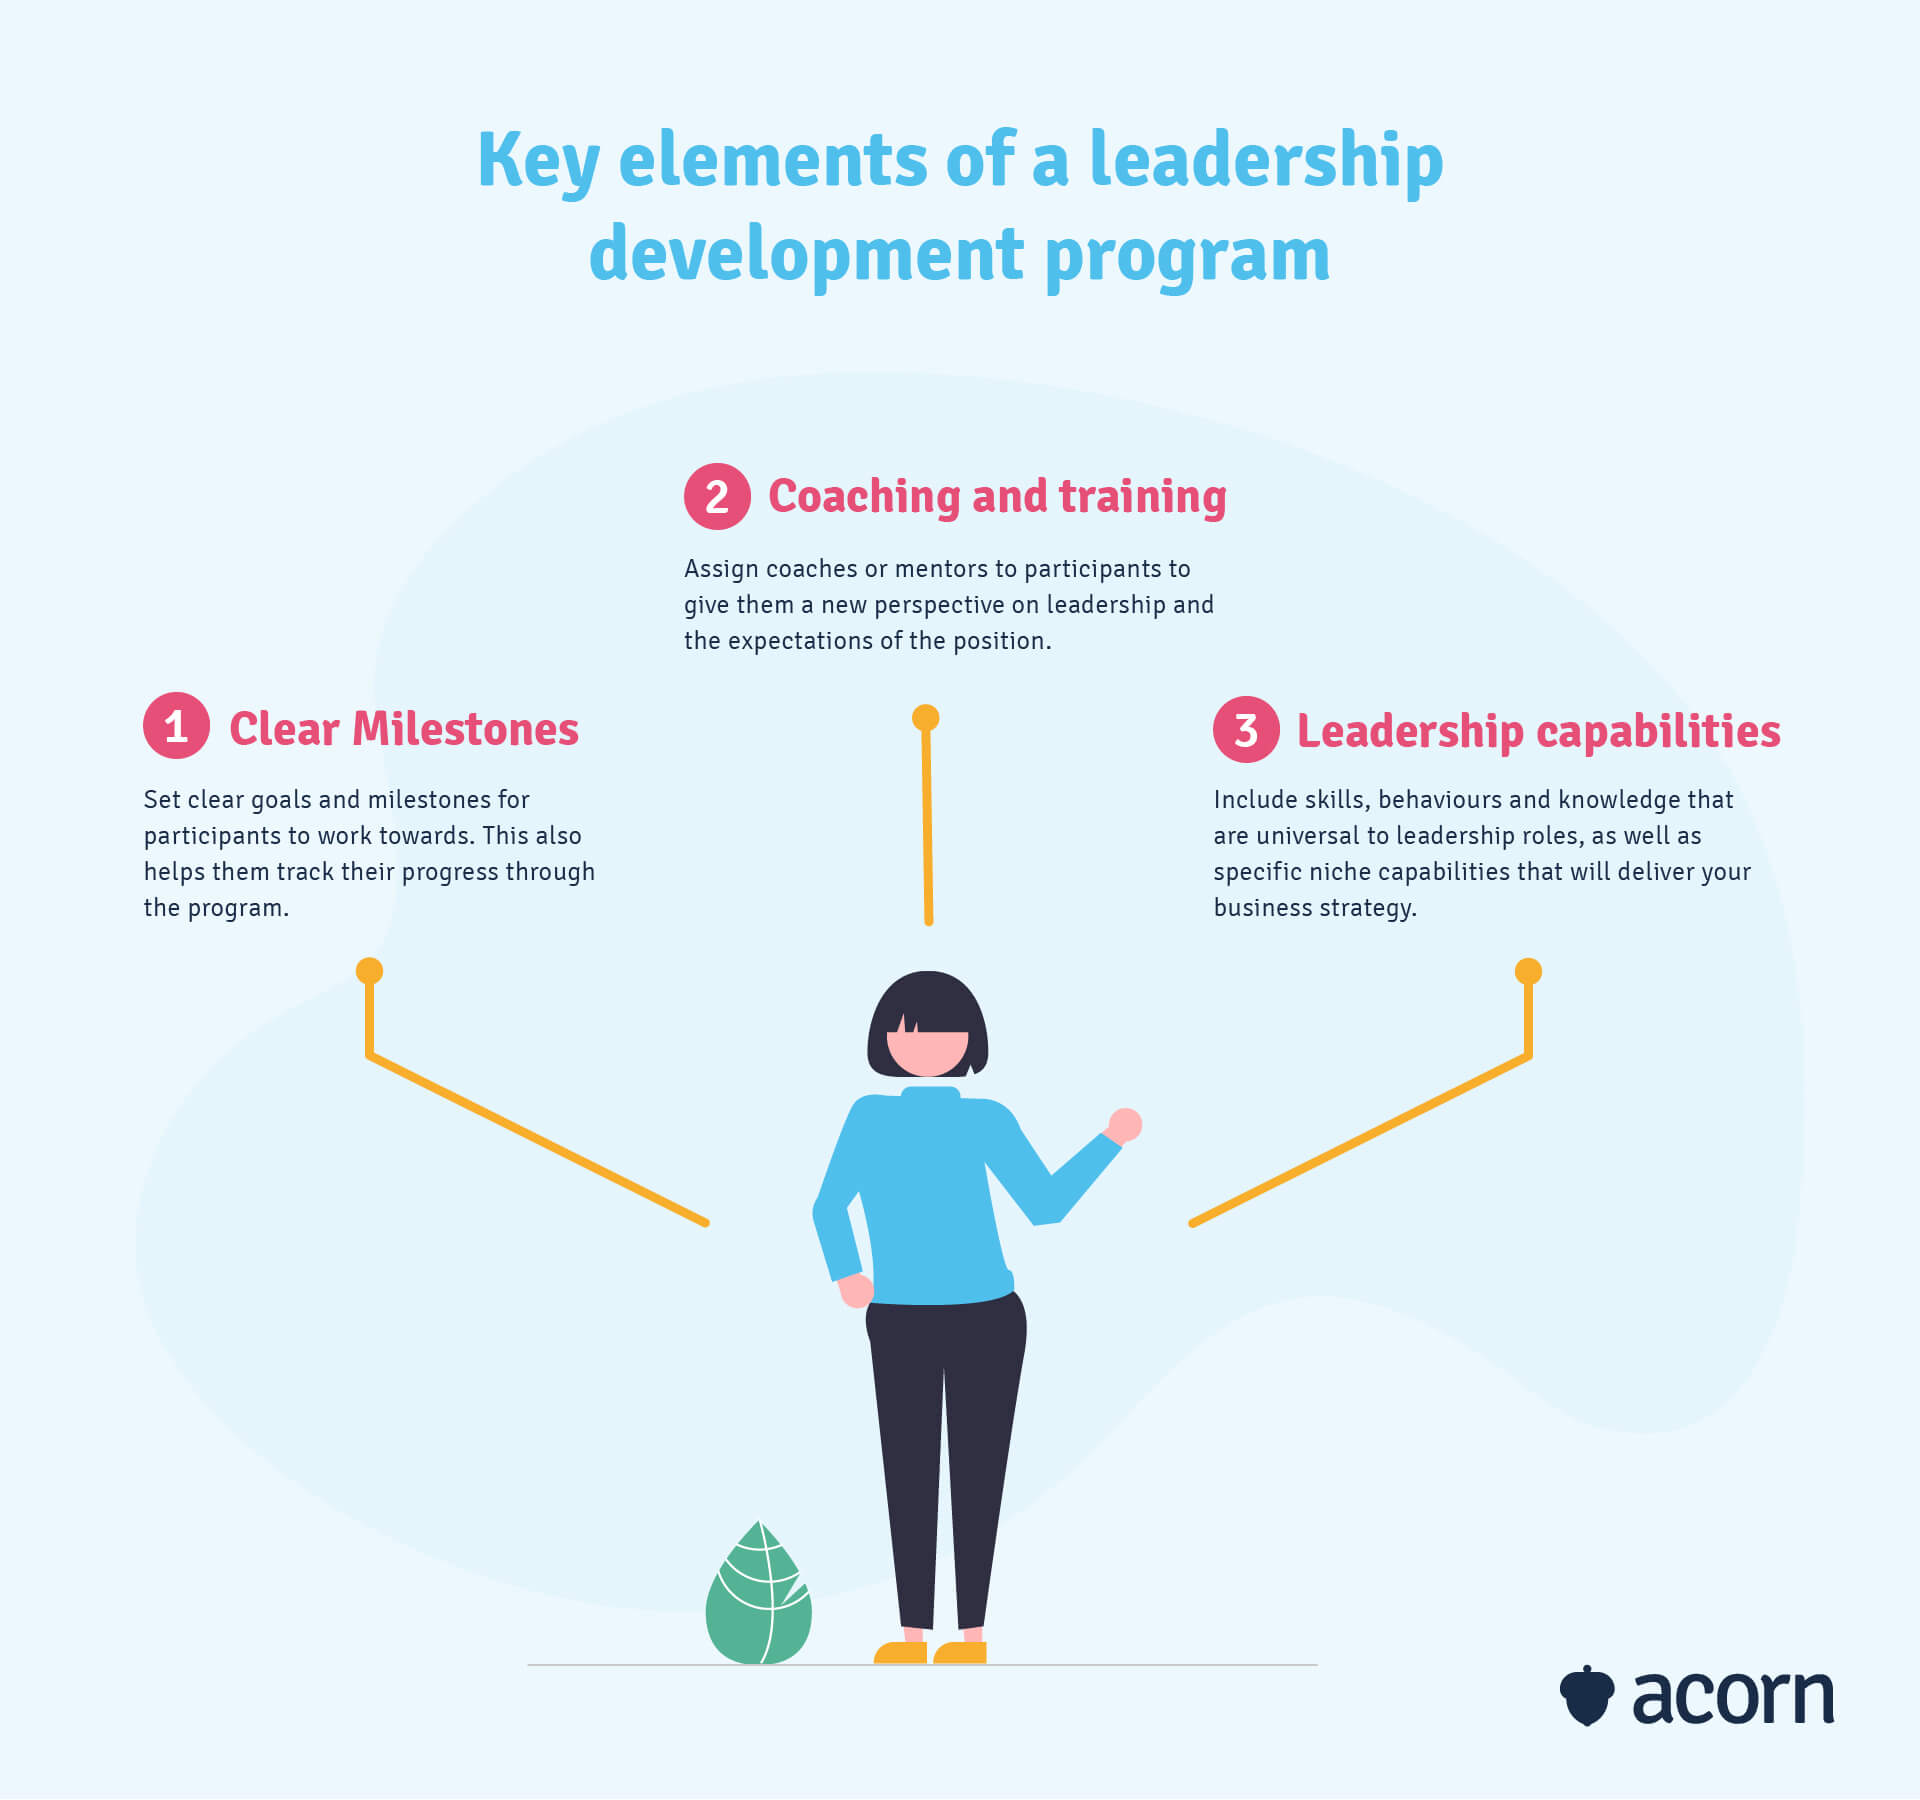 The key elements to include in a leadership development program